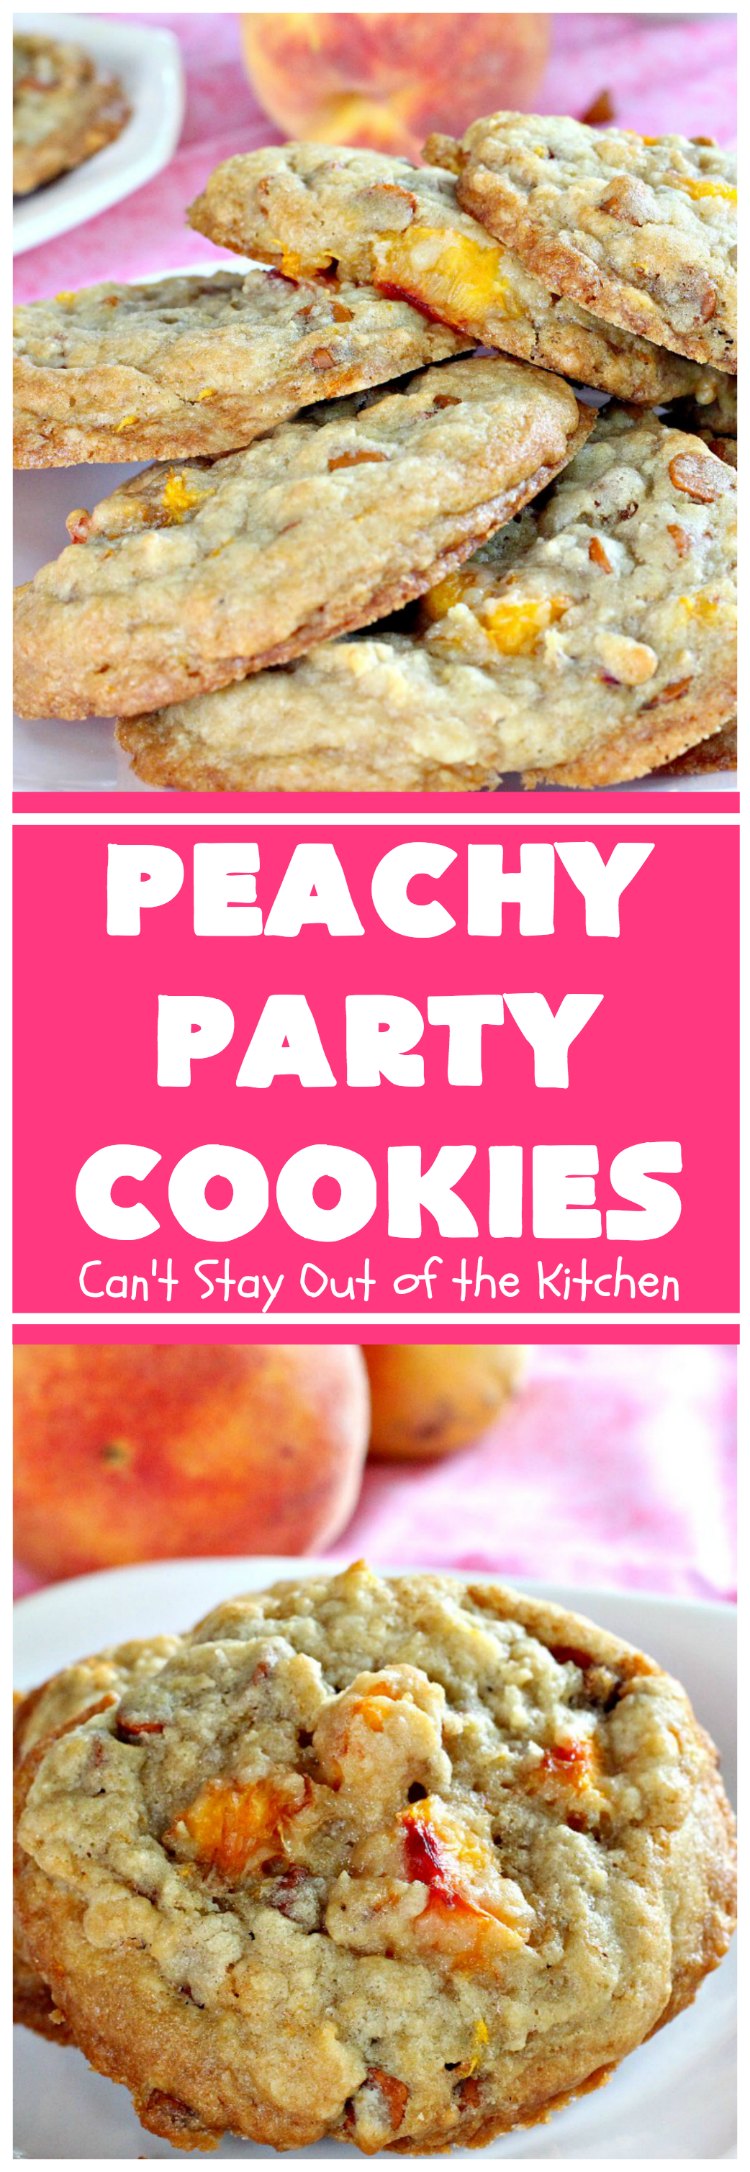 Peachy Party Cookies | Can't Stay Out of the Kitchen